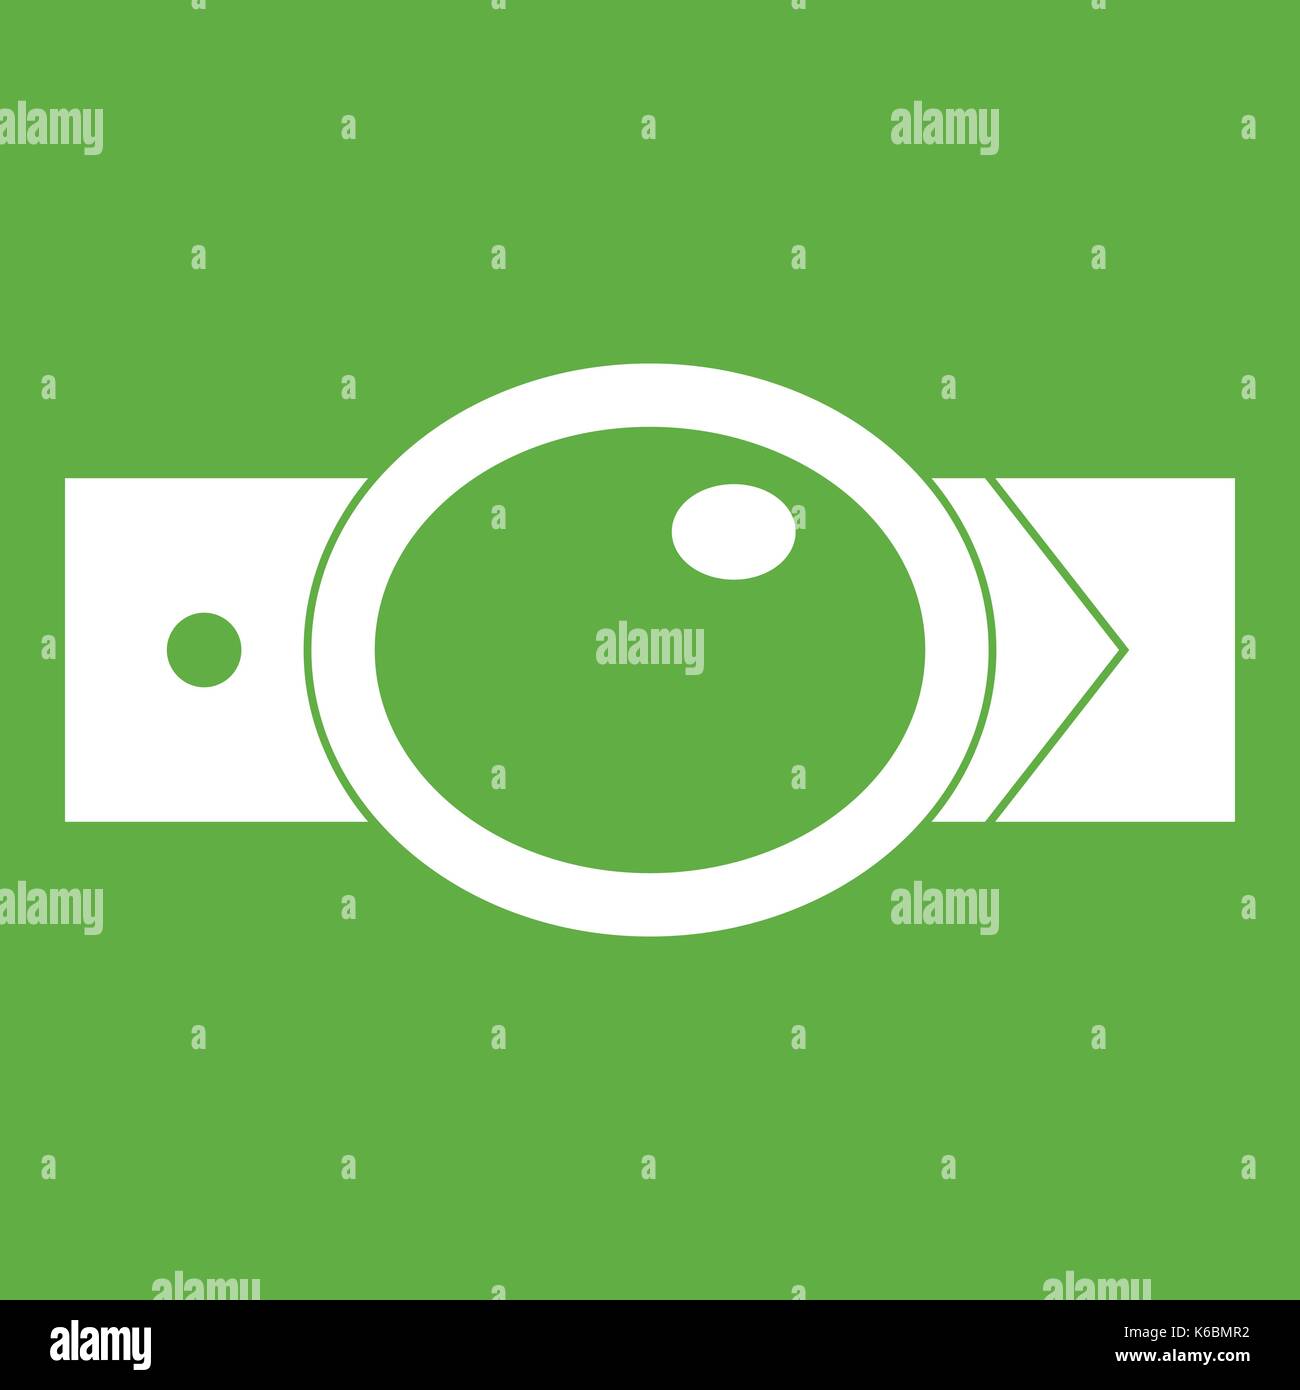 Belt with oval shaped buckle icon green Stock Vector